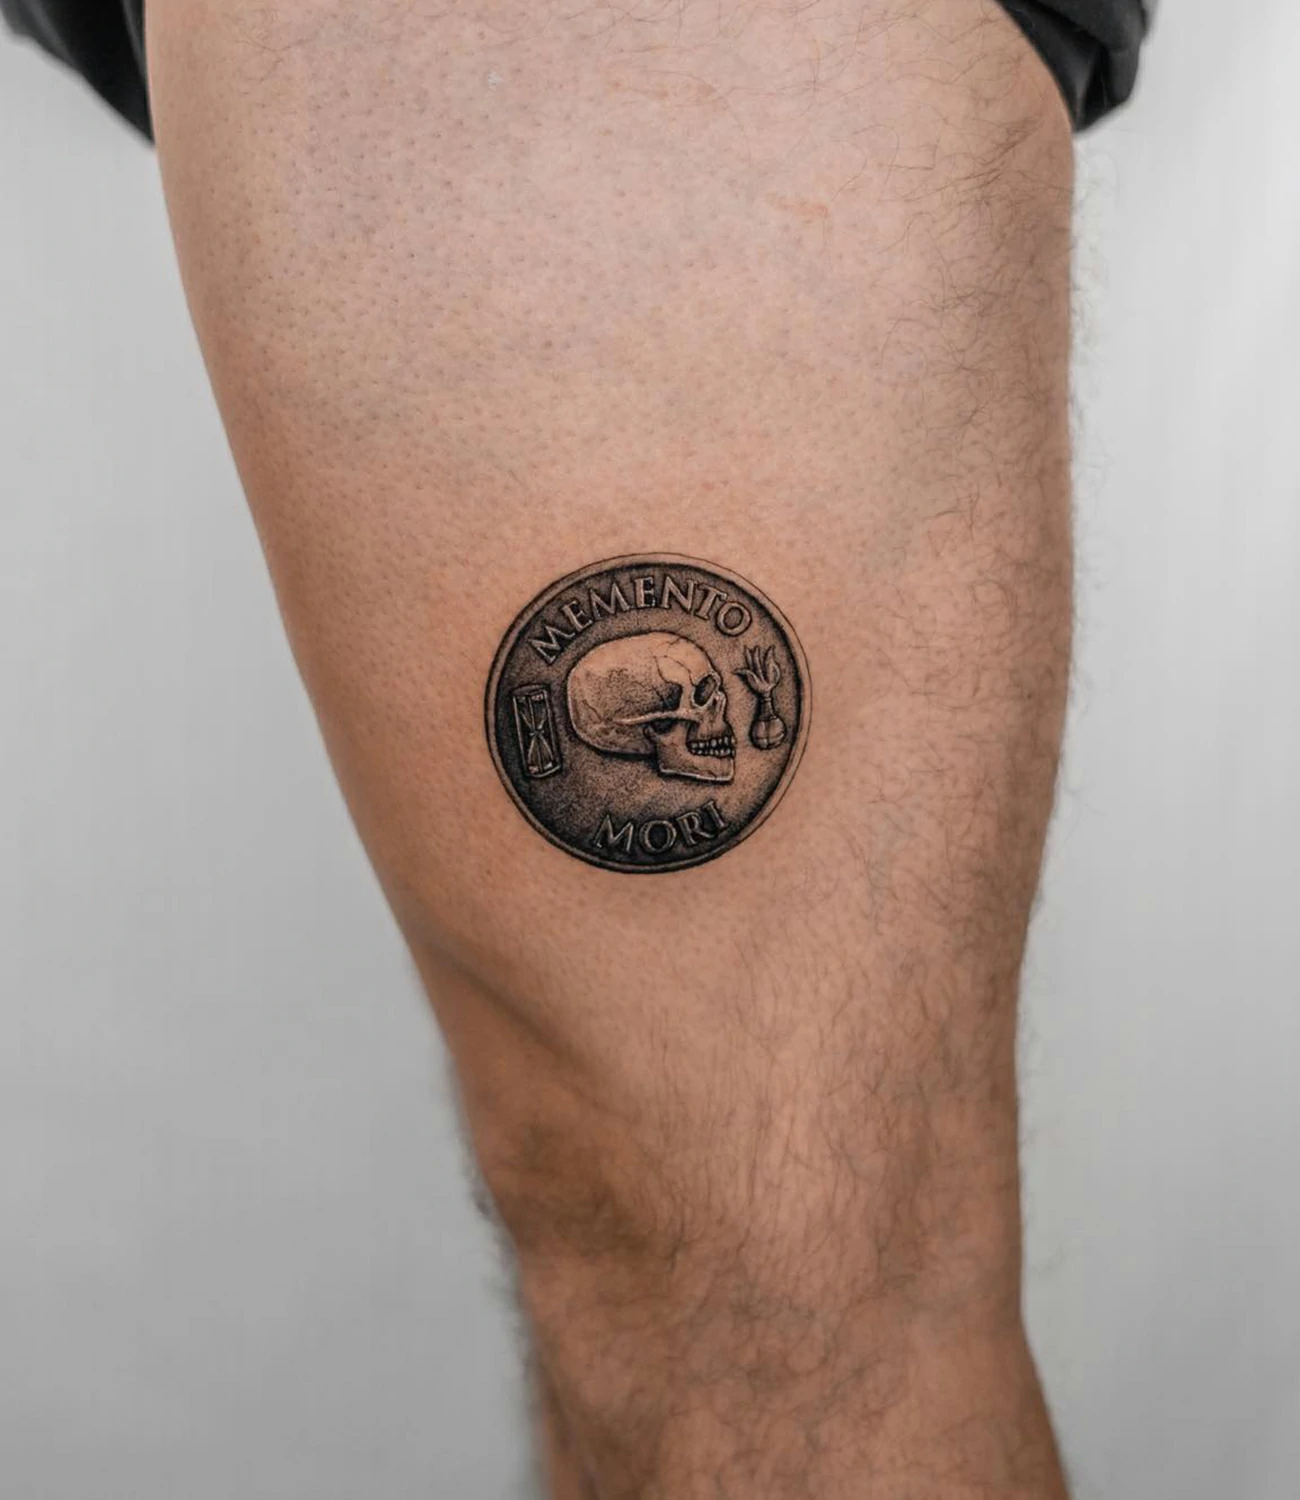 memento mori coin tattoo: A tattoo featuring a coin with "memento mori" inscribed, possibly styled after ancient Roman coins.